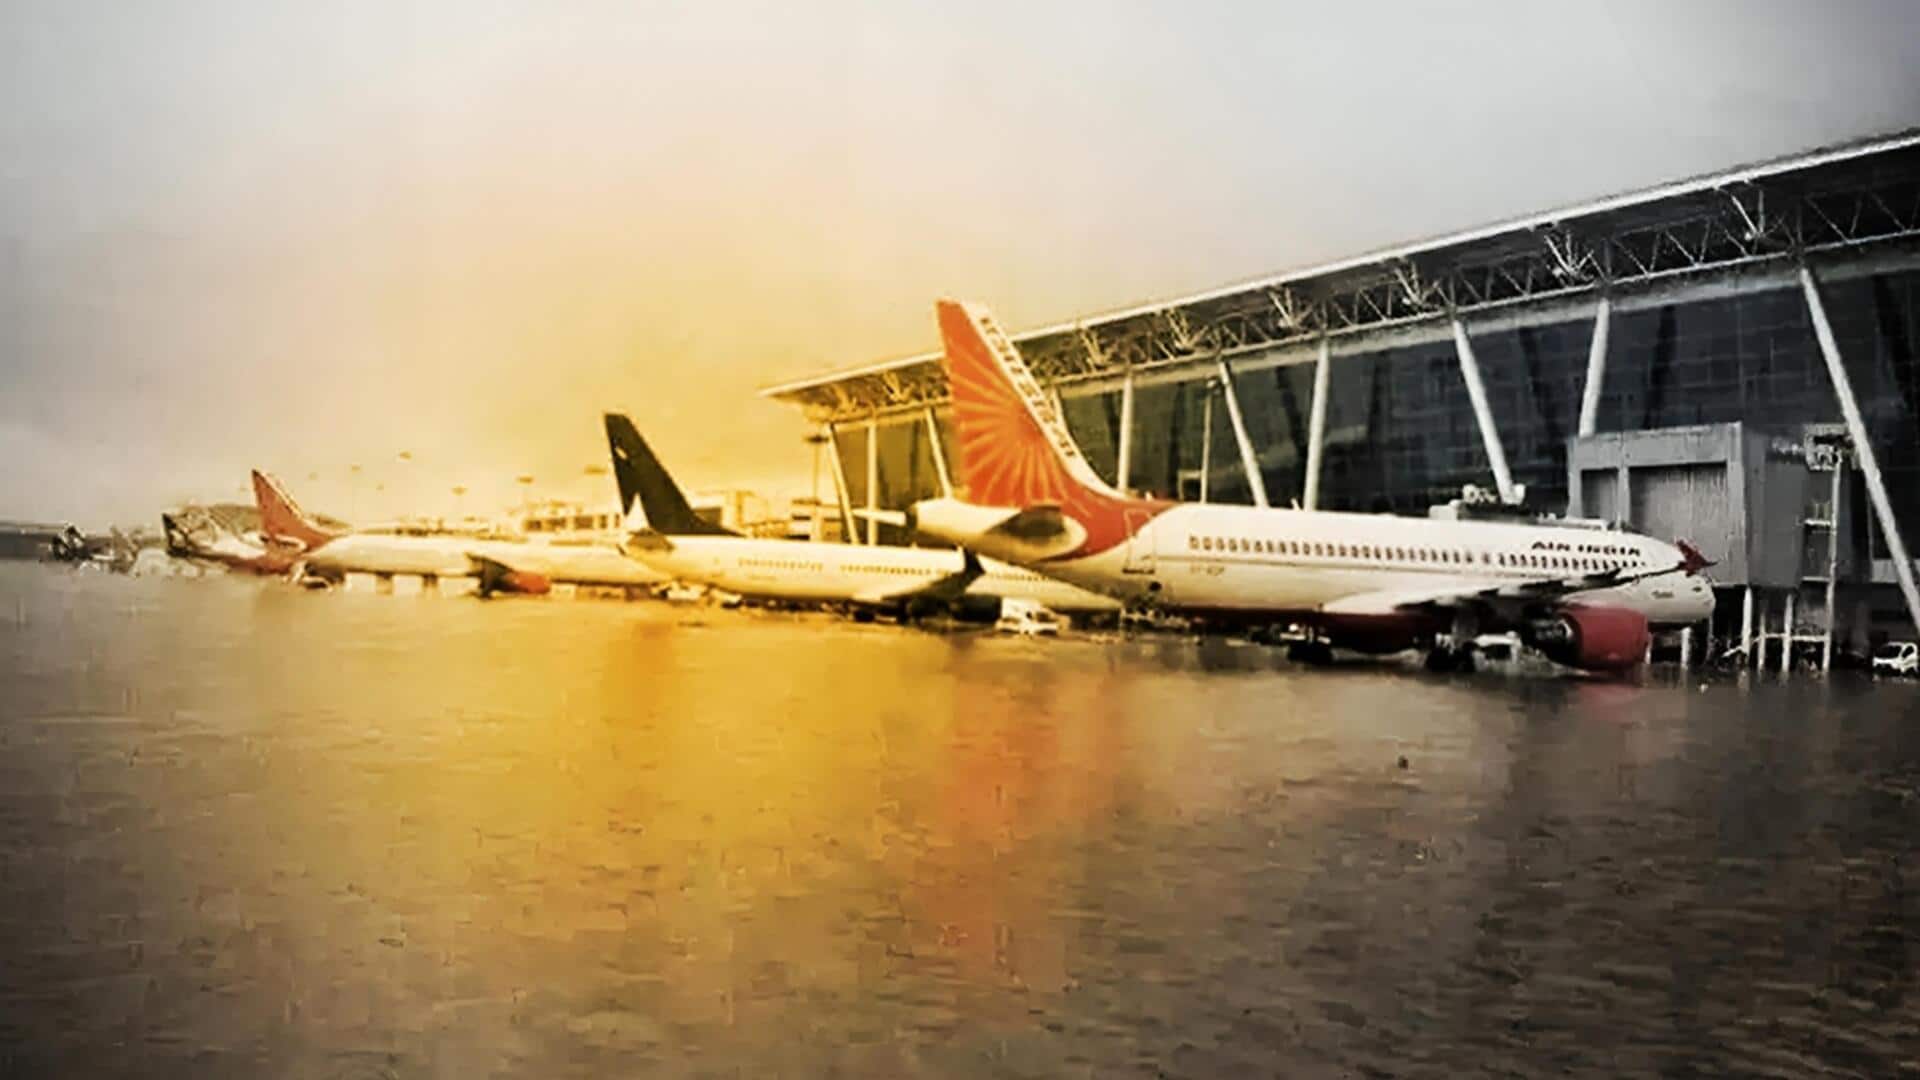 Bengaluru airport's T2 sees water leakage after heavy rainfall